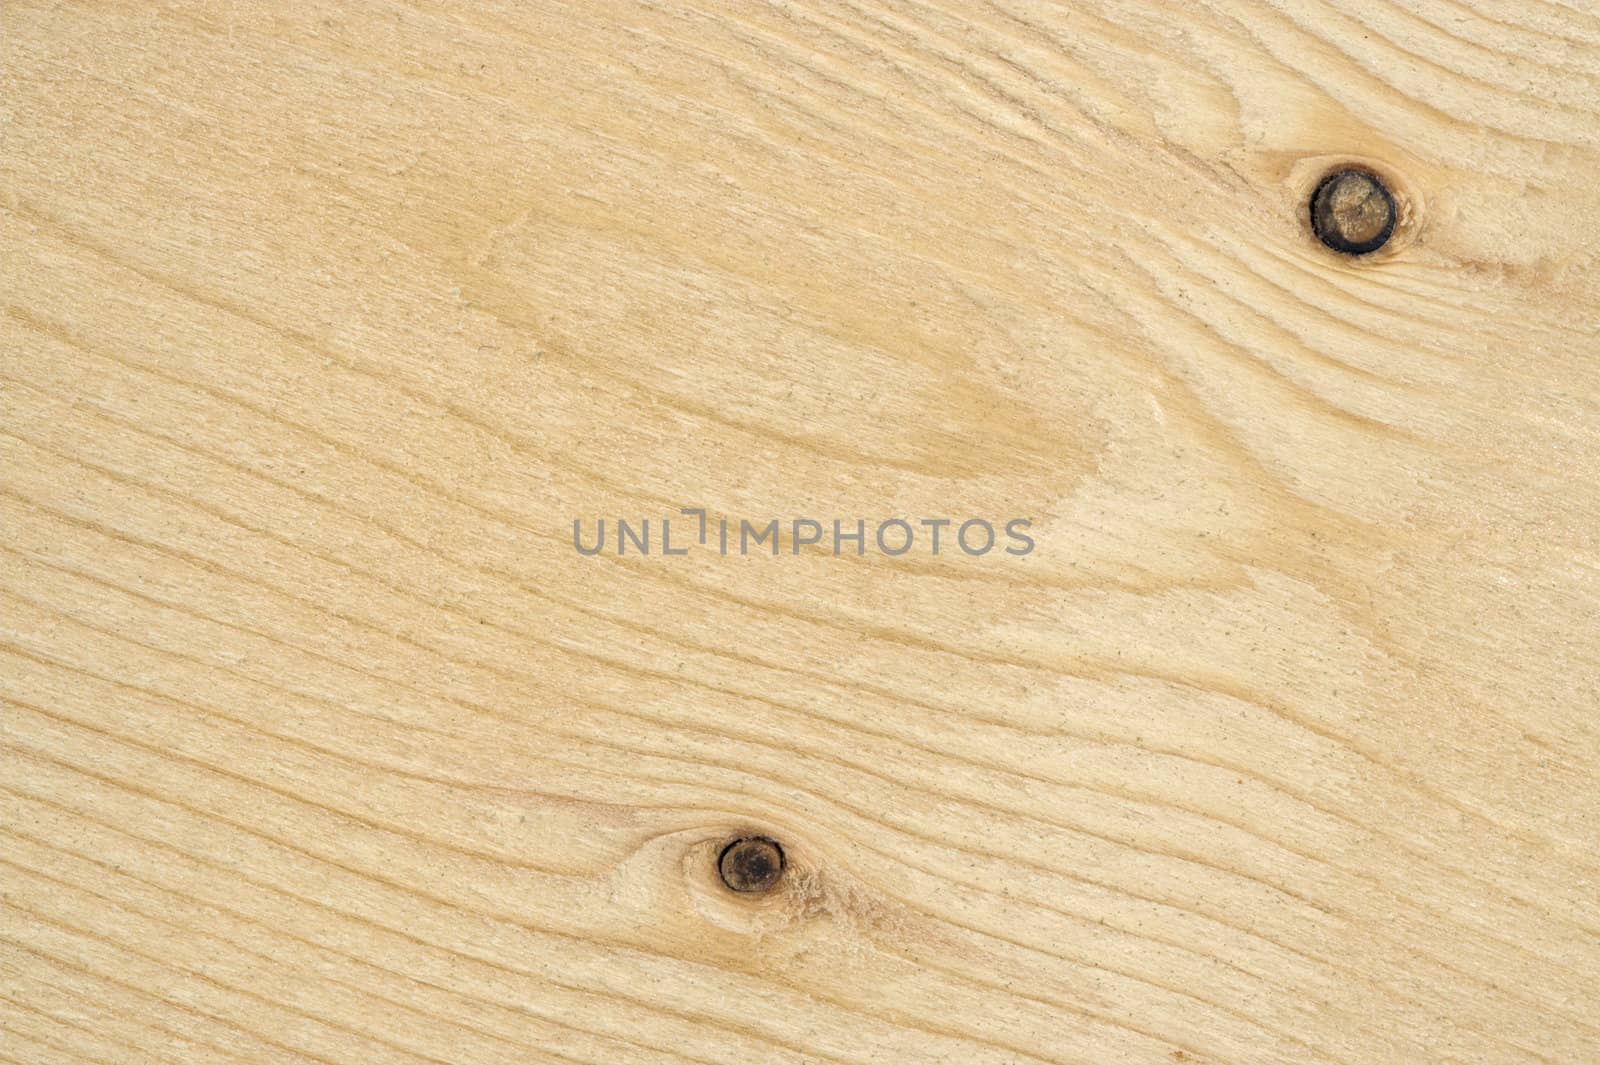 A wood background showing detail and texture